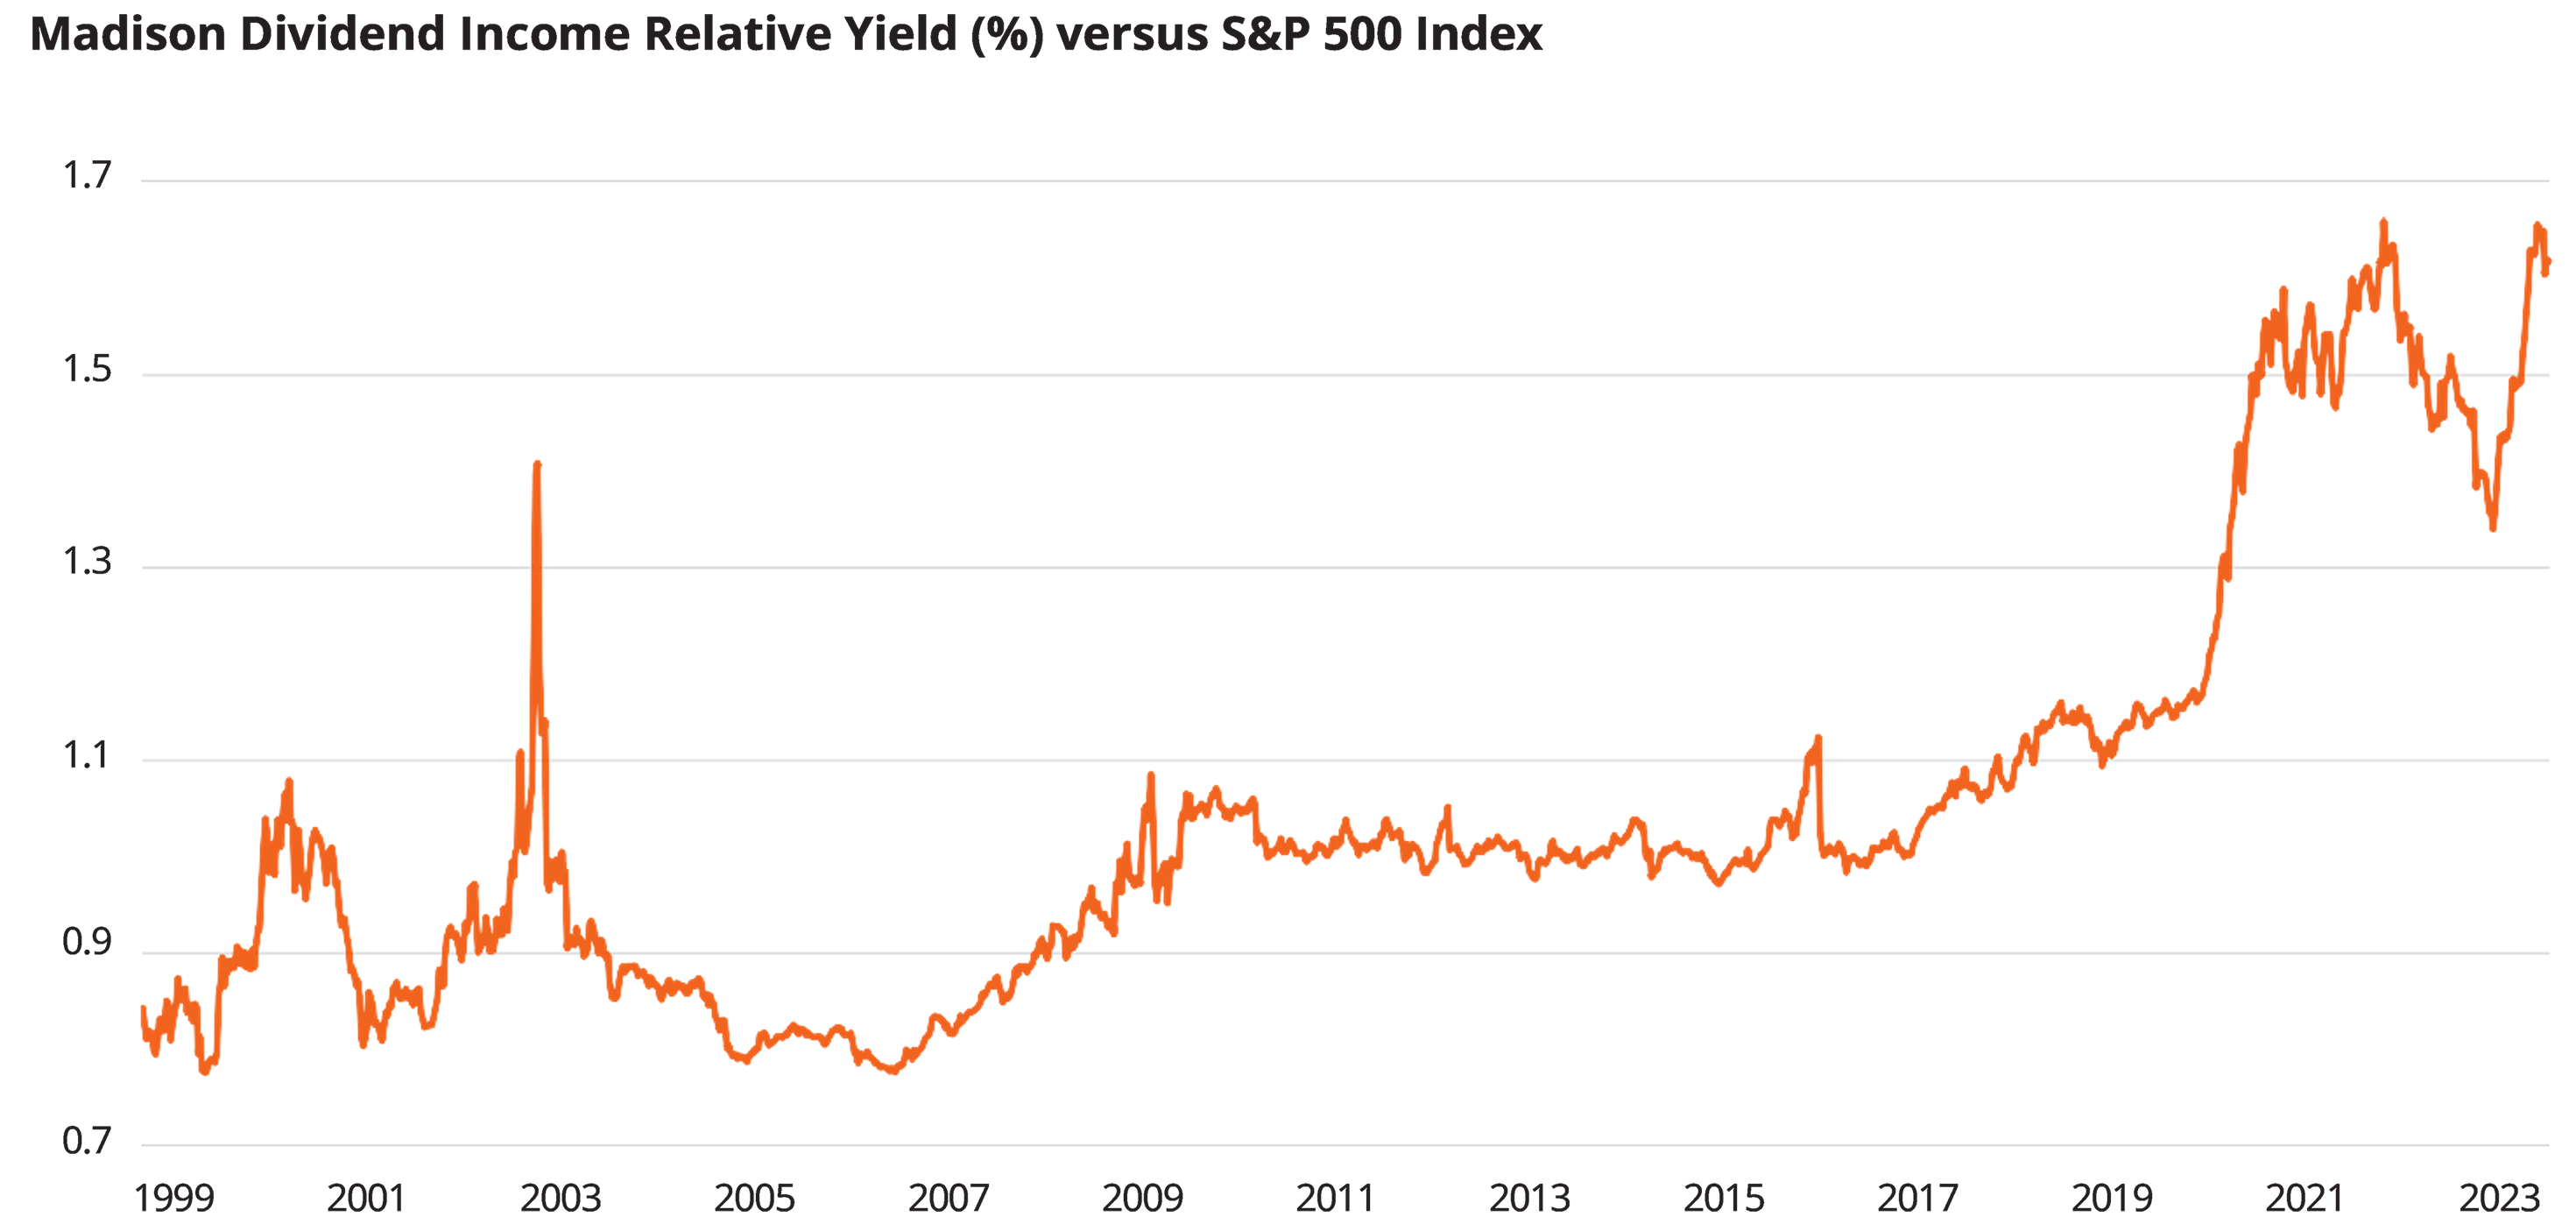 Madison Dividend Income Relative Yield (%) versus S&P 500 Index